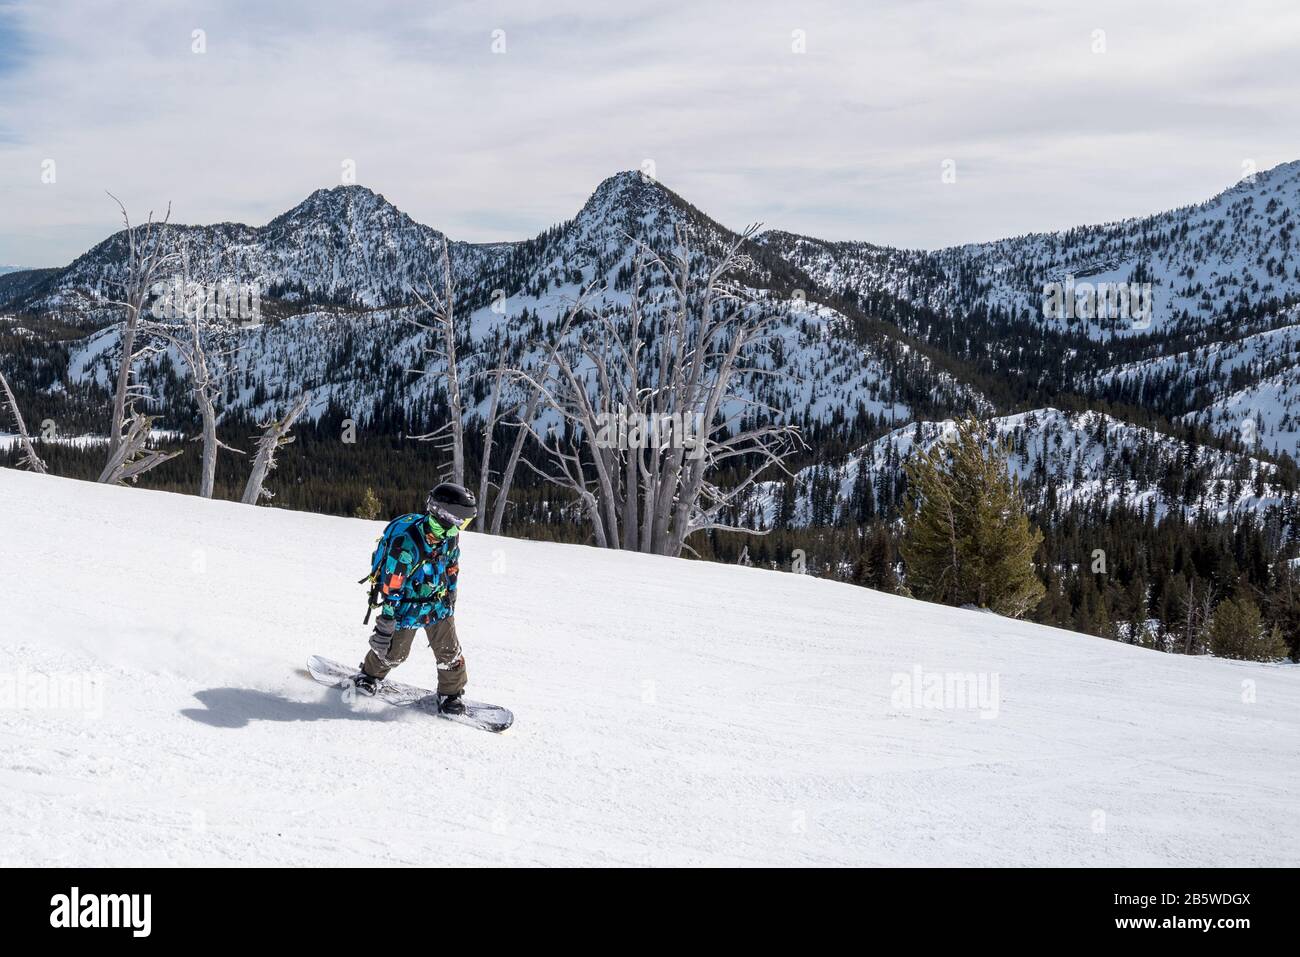 Snowboarding at Anthony Lakes Mountain Resort in Eastern Oregon. Stock Photo